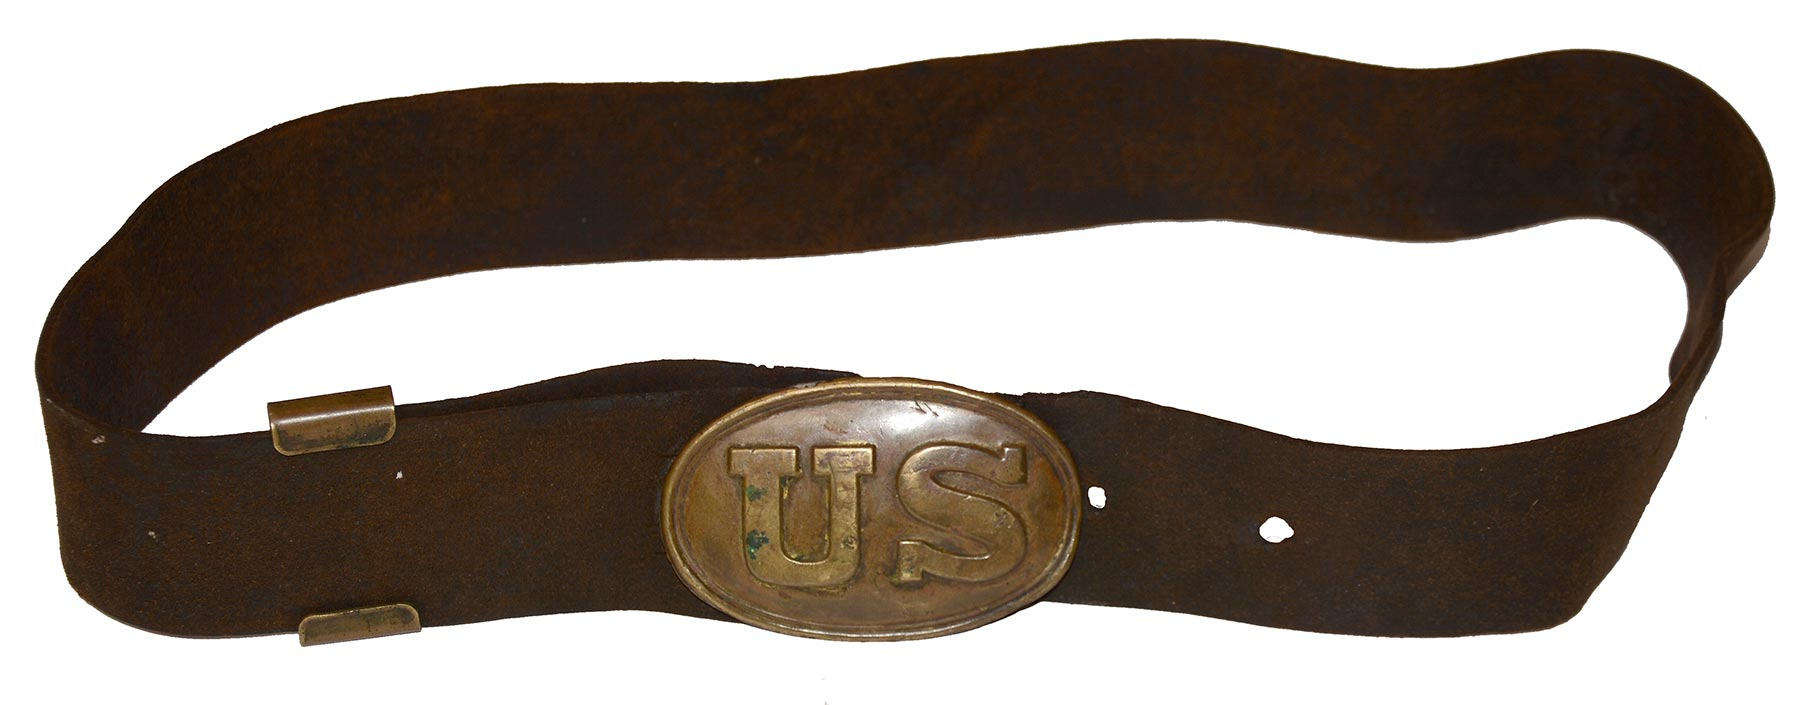 US ENLISTED MAN’S BELT WITH ID TO OHIO SOLDIER WOUNDED AT WINCHESTER